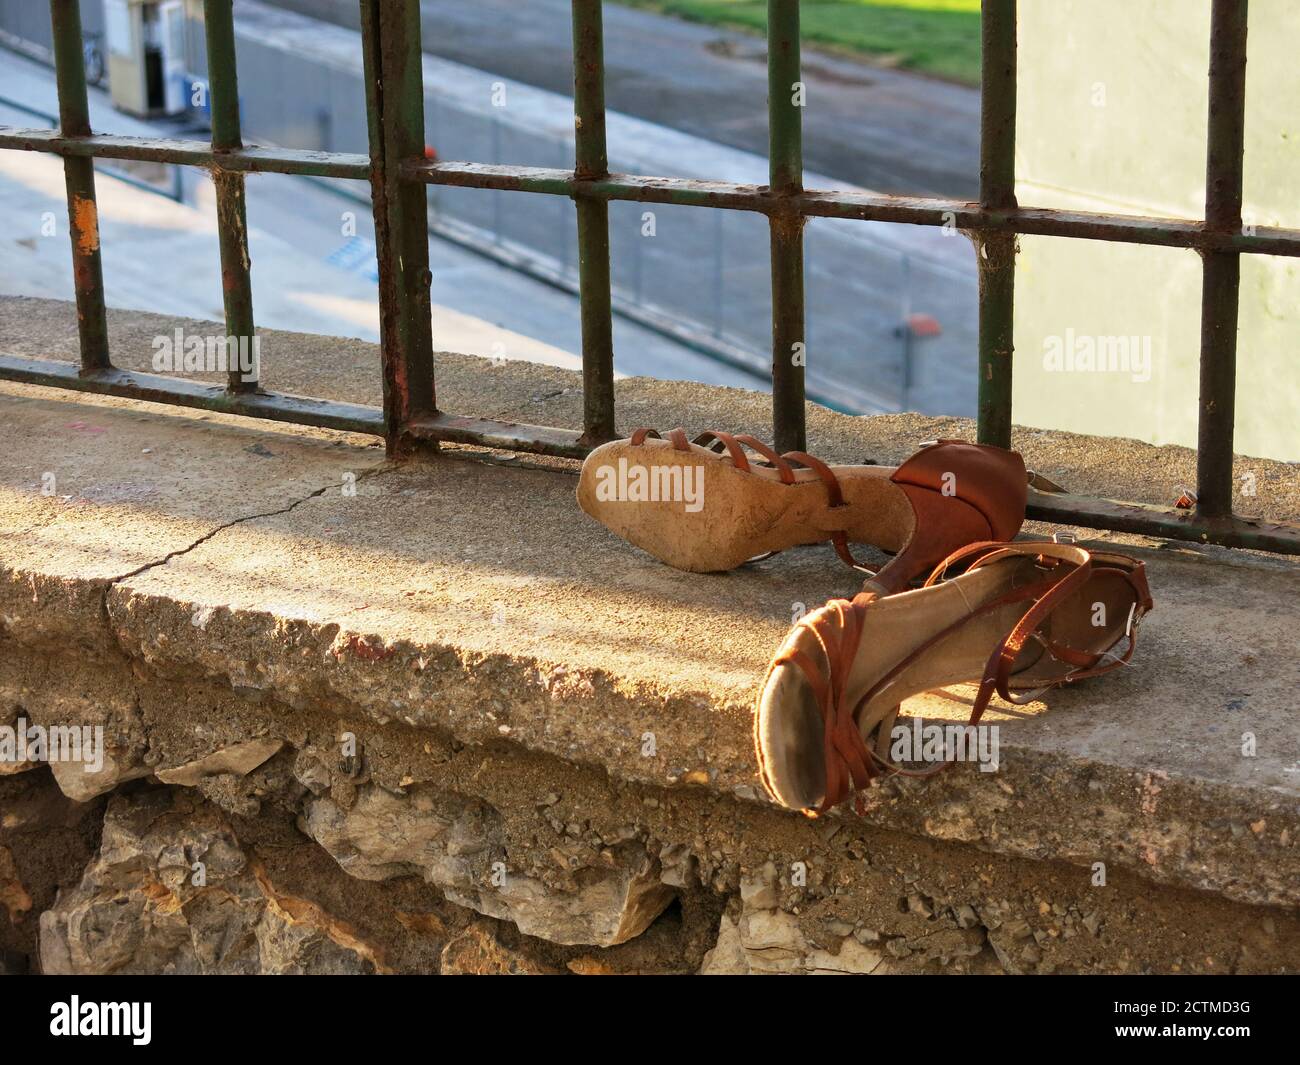 Worn woman's leather shoes left on a ledge for someone who would be in need  to take. Concept : Minimalism in Photography, reusing items Stock Photo -  Alamy